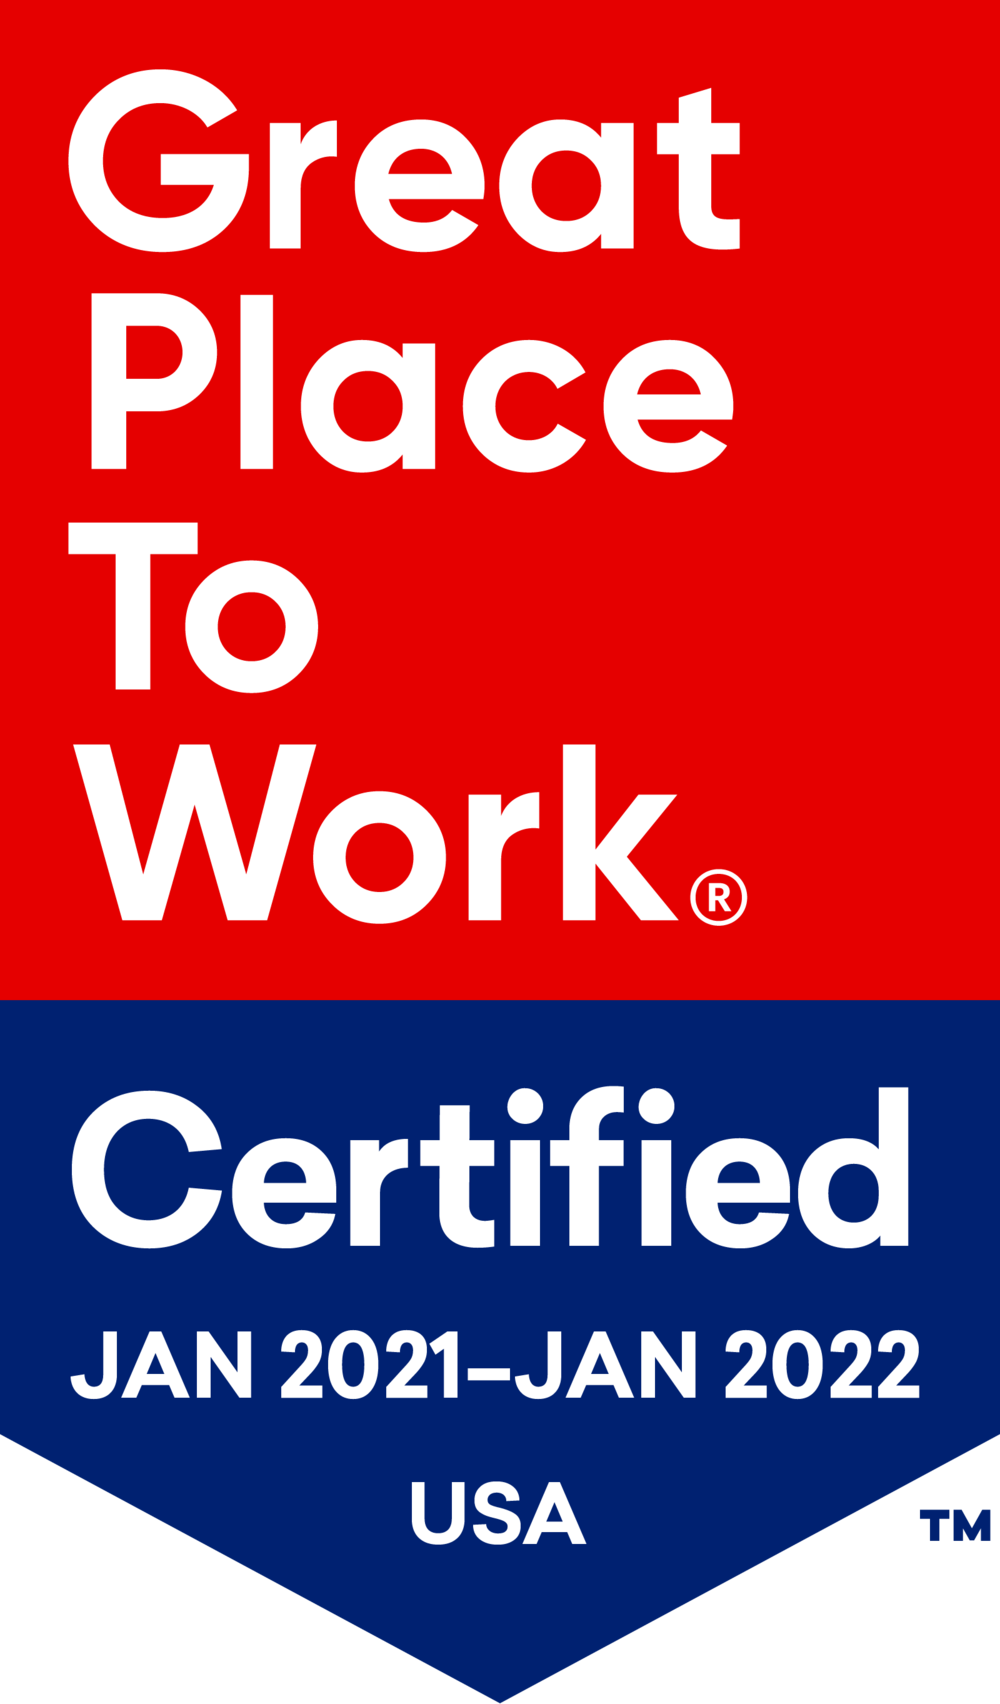 Great place to work badge 2021